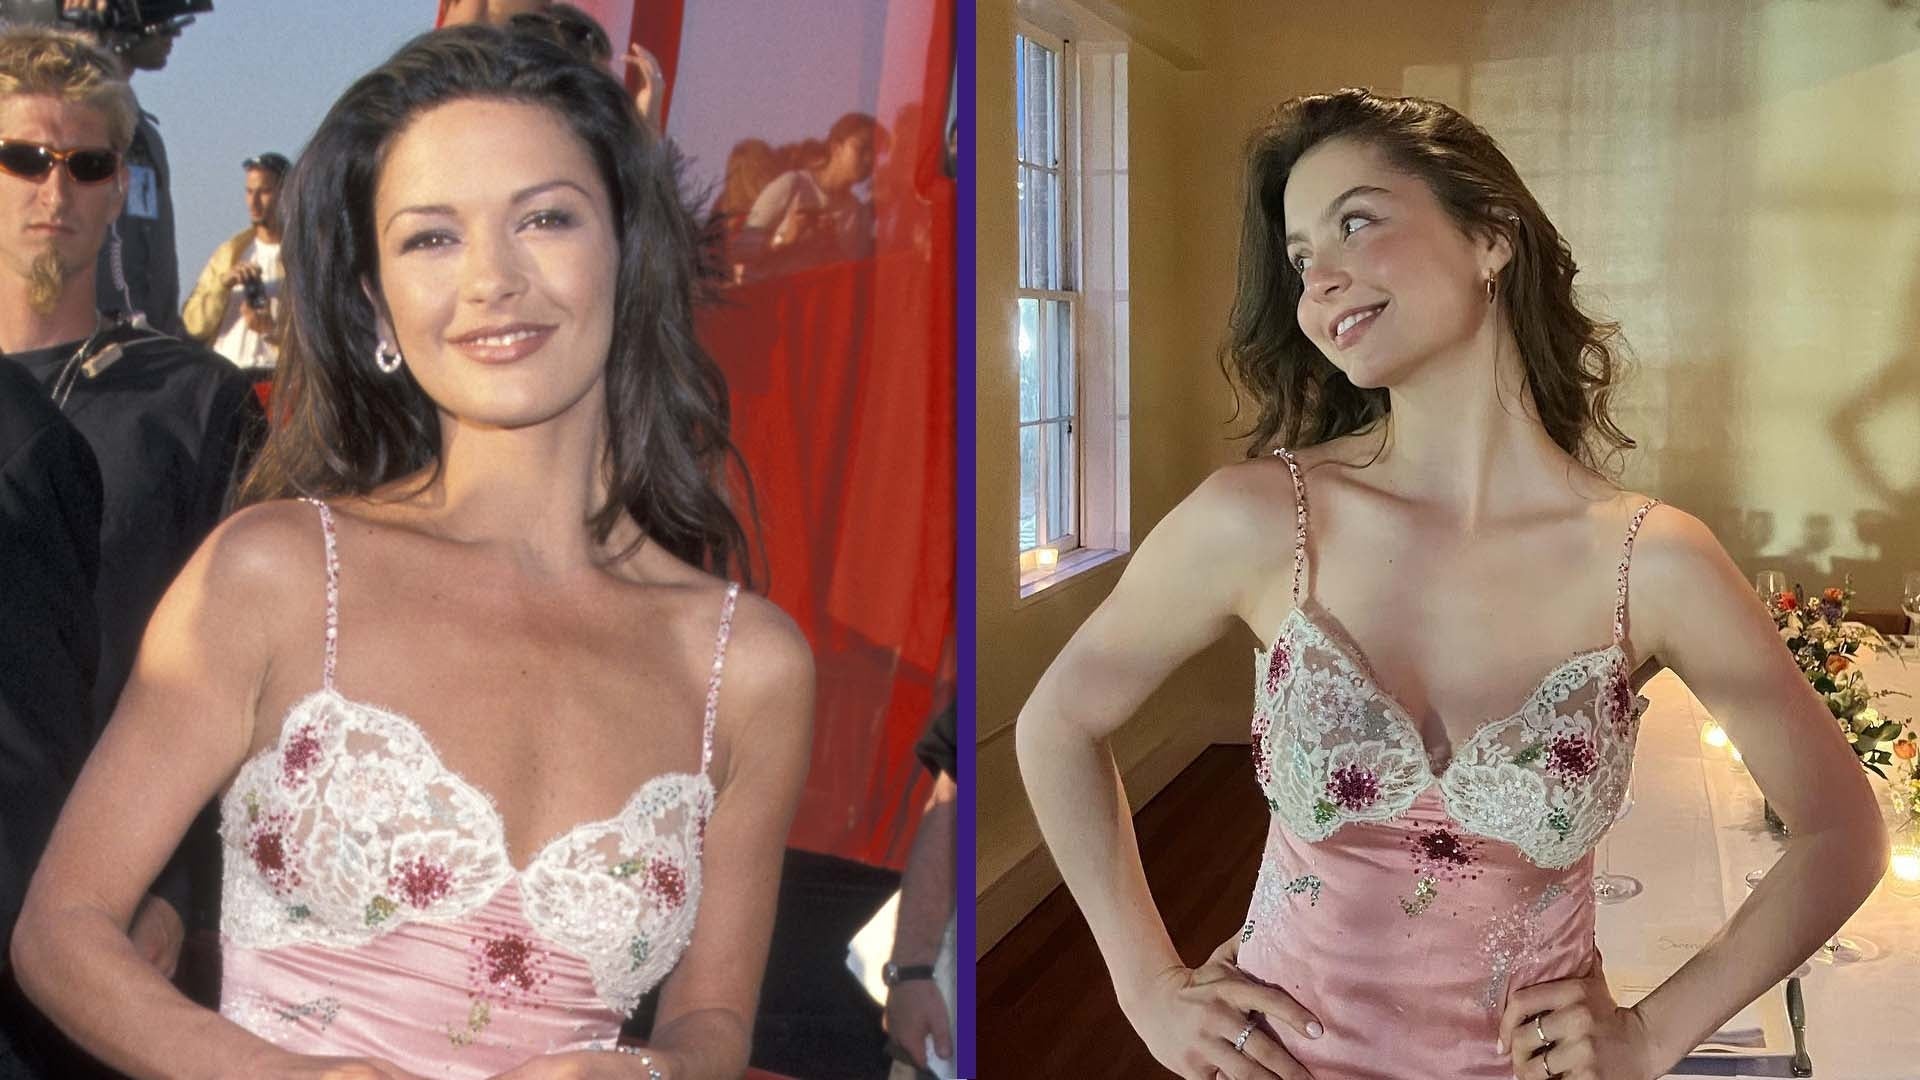 Catherine Zeta-Jones’ Daughter Carys Stuns as Her Mini-Me in Her Dress From the ‘90s